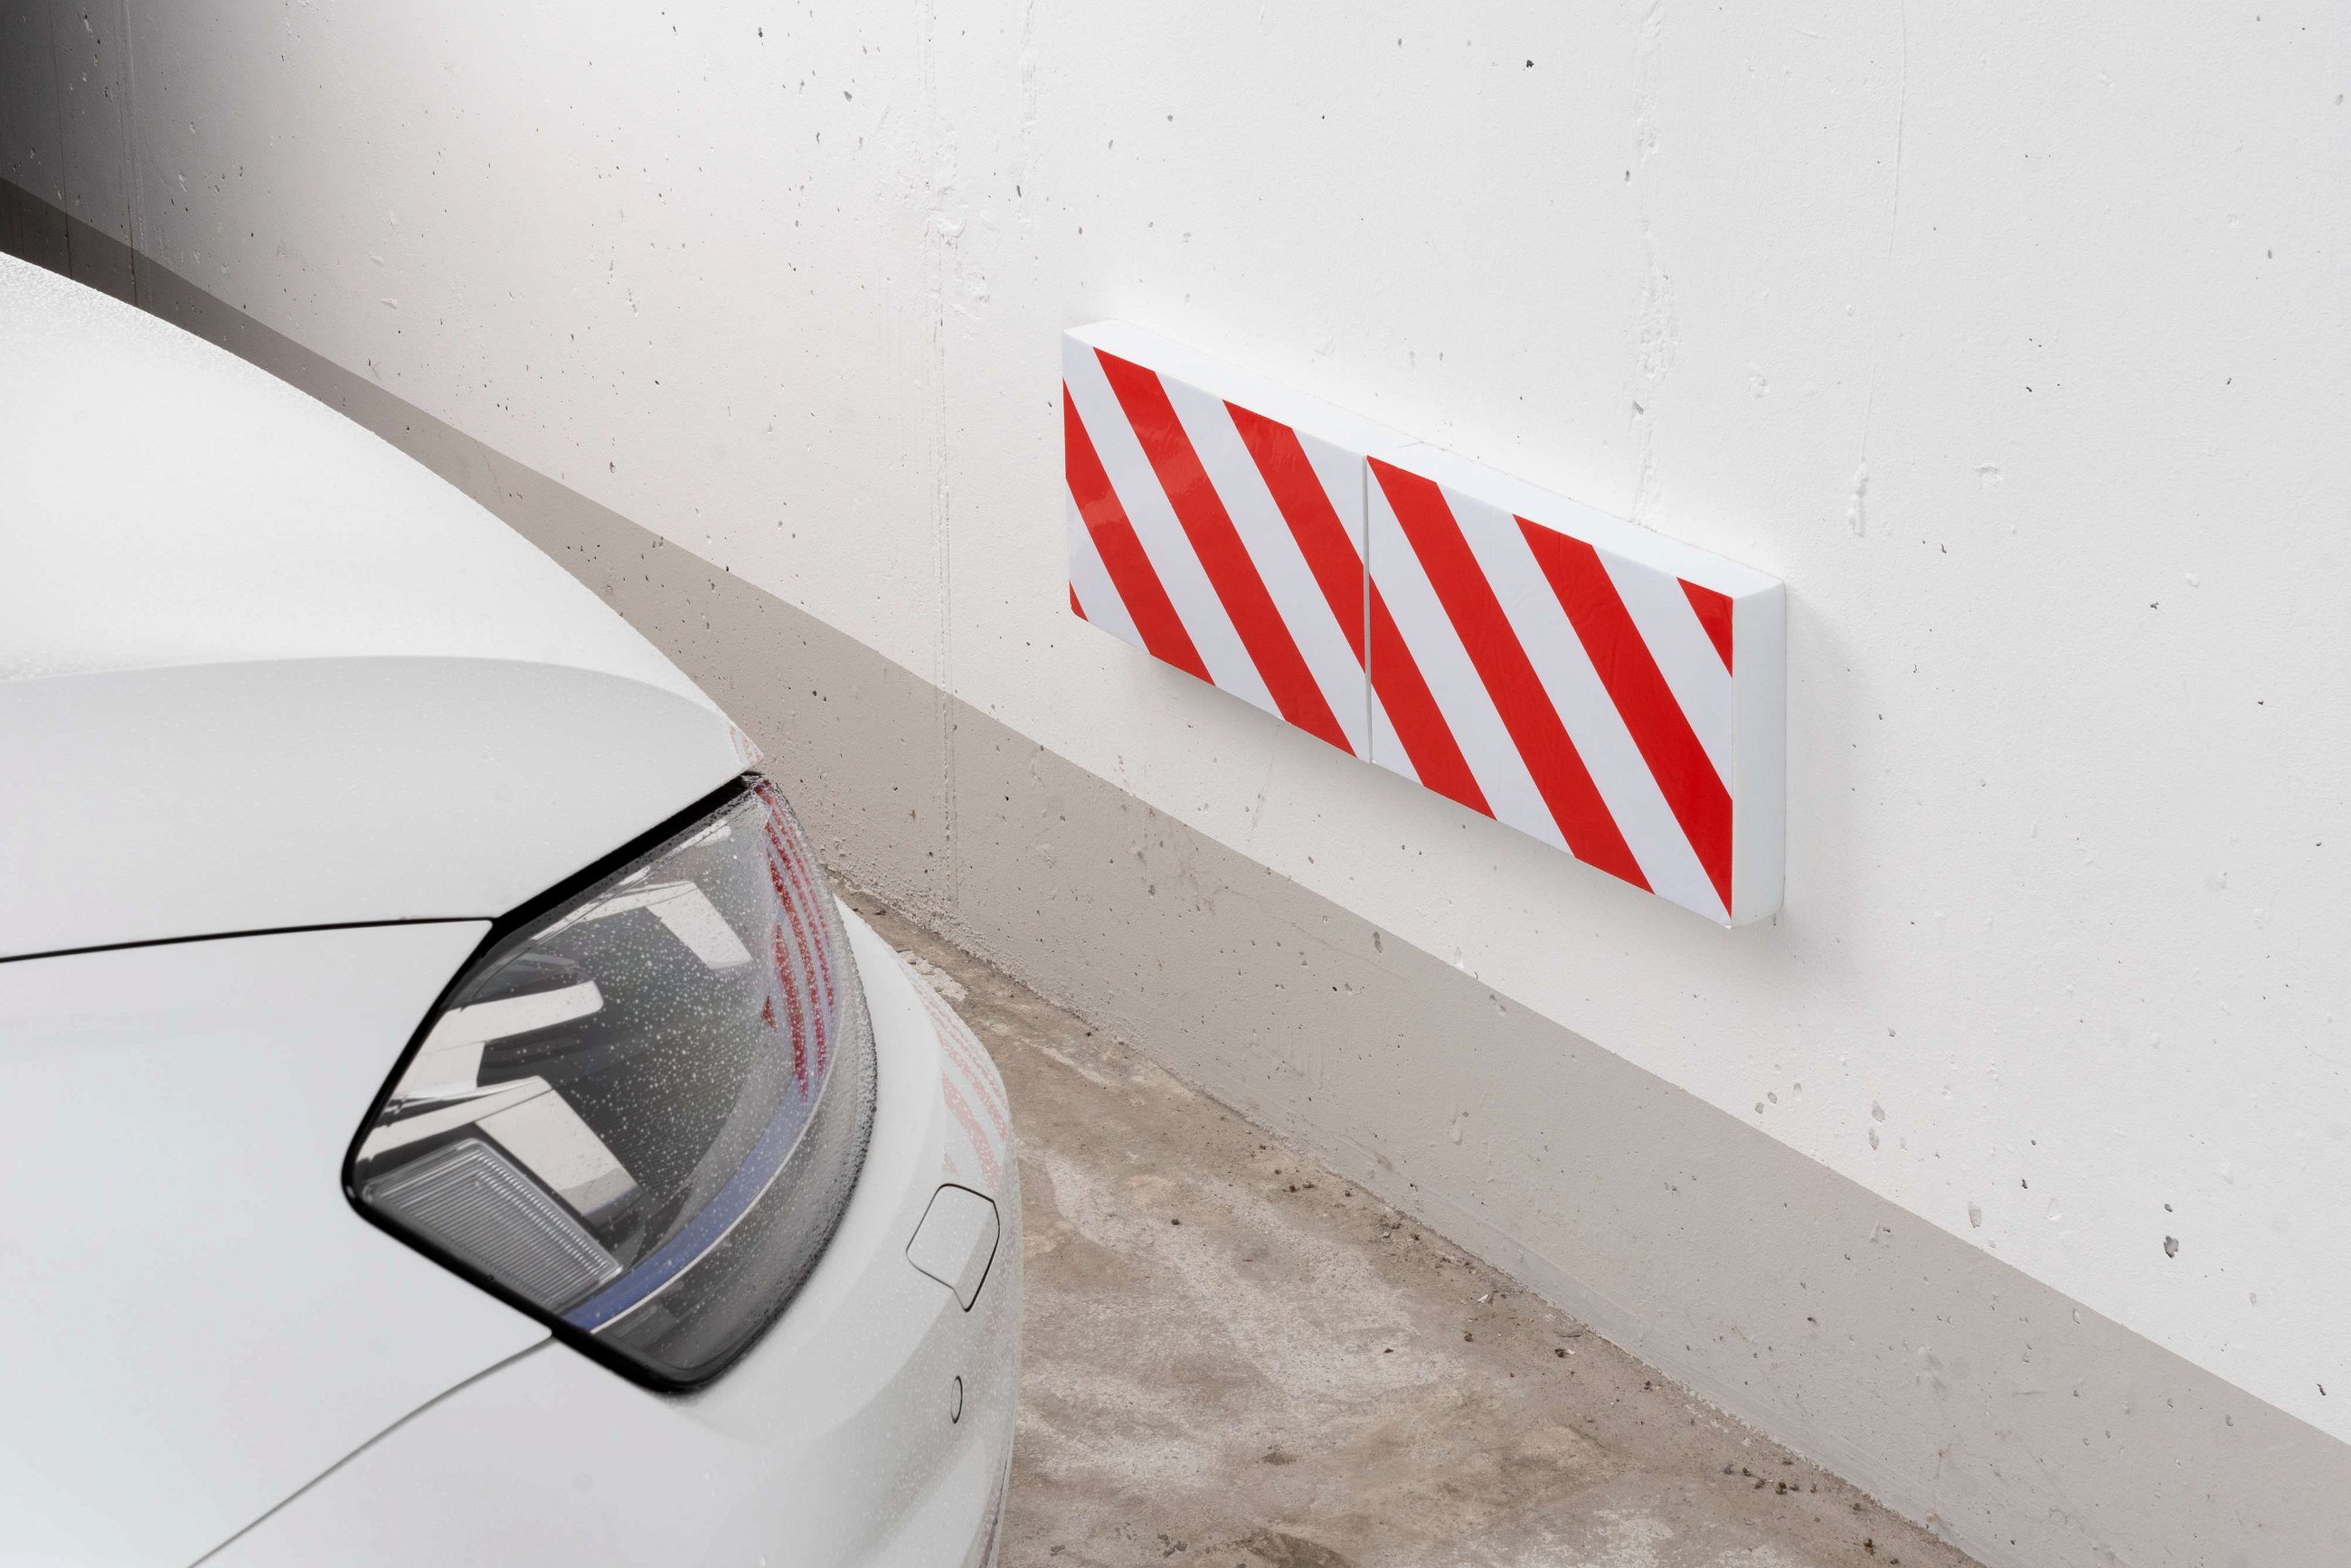 Garage wall protection, 2 pieces Car door edge protection self-adhesive 32x20x4 cm red/white